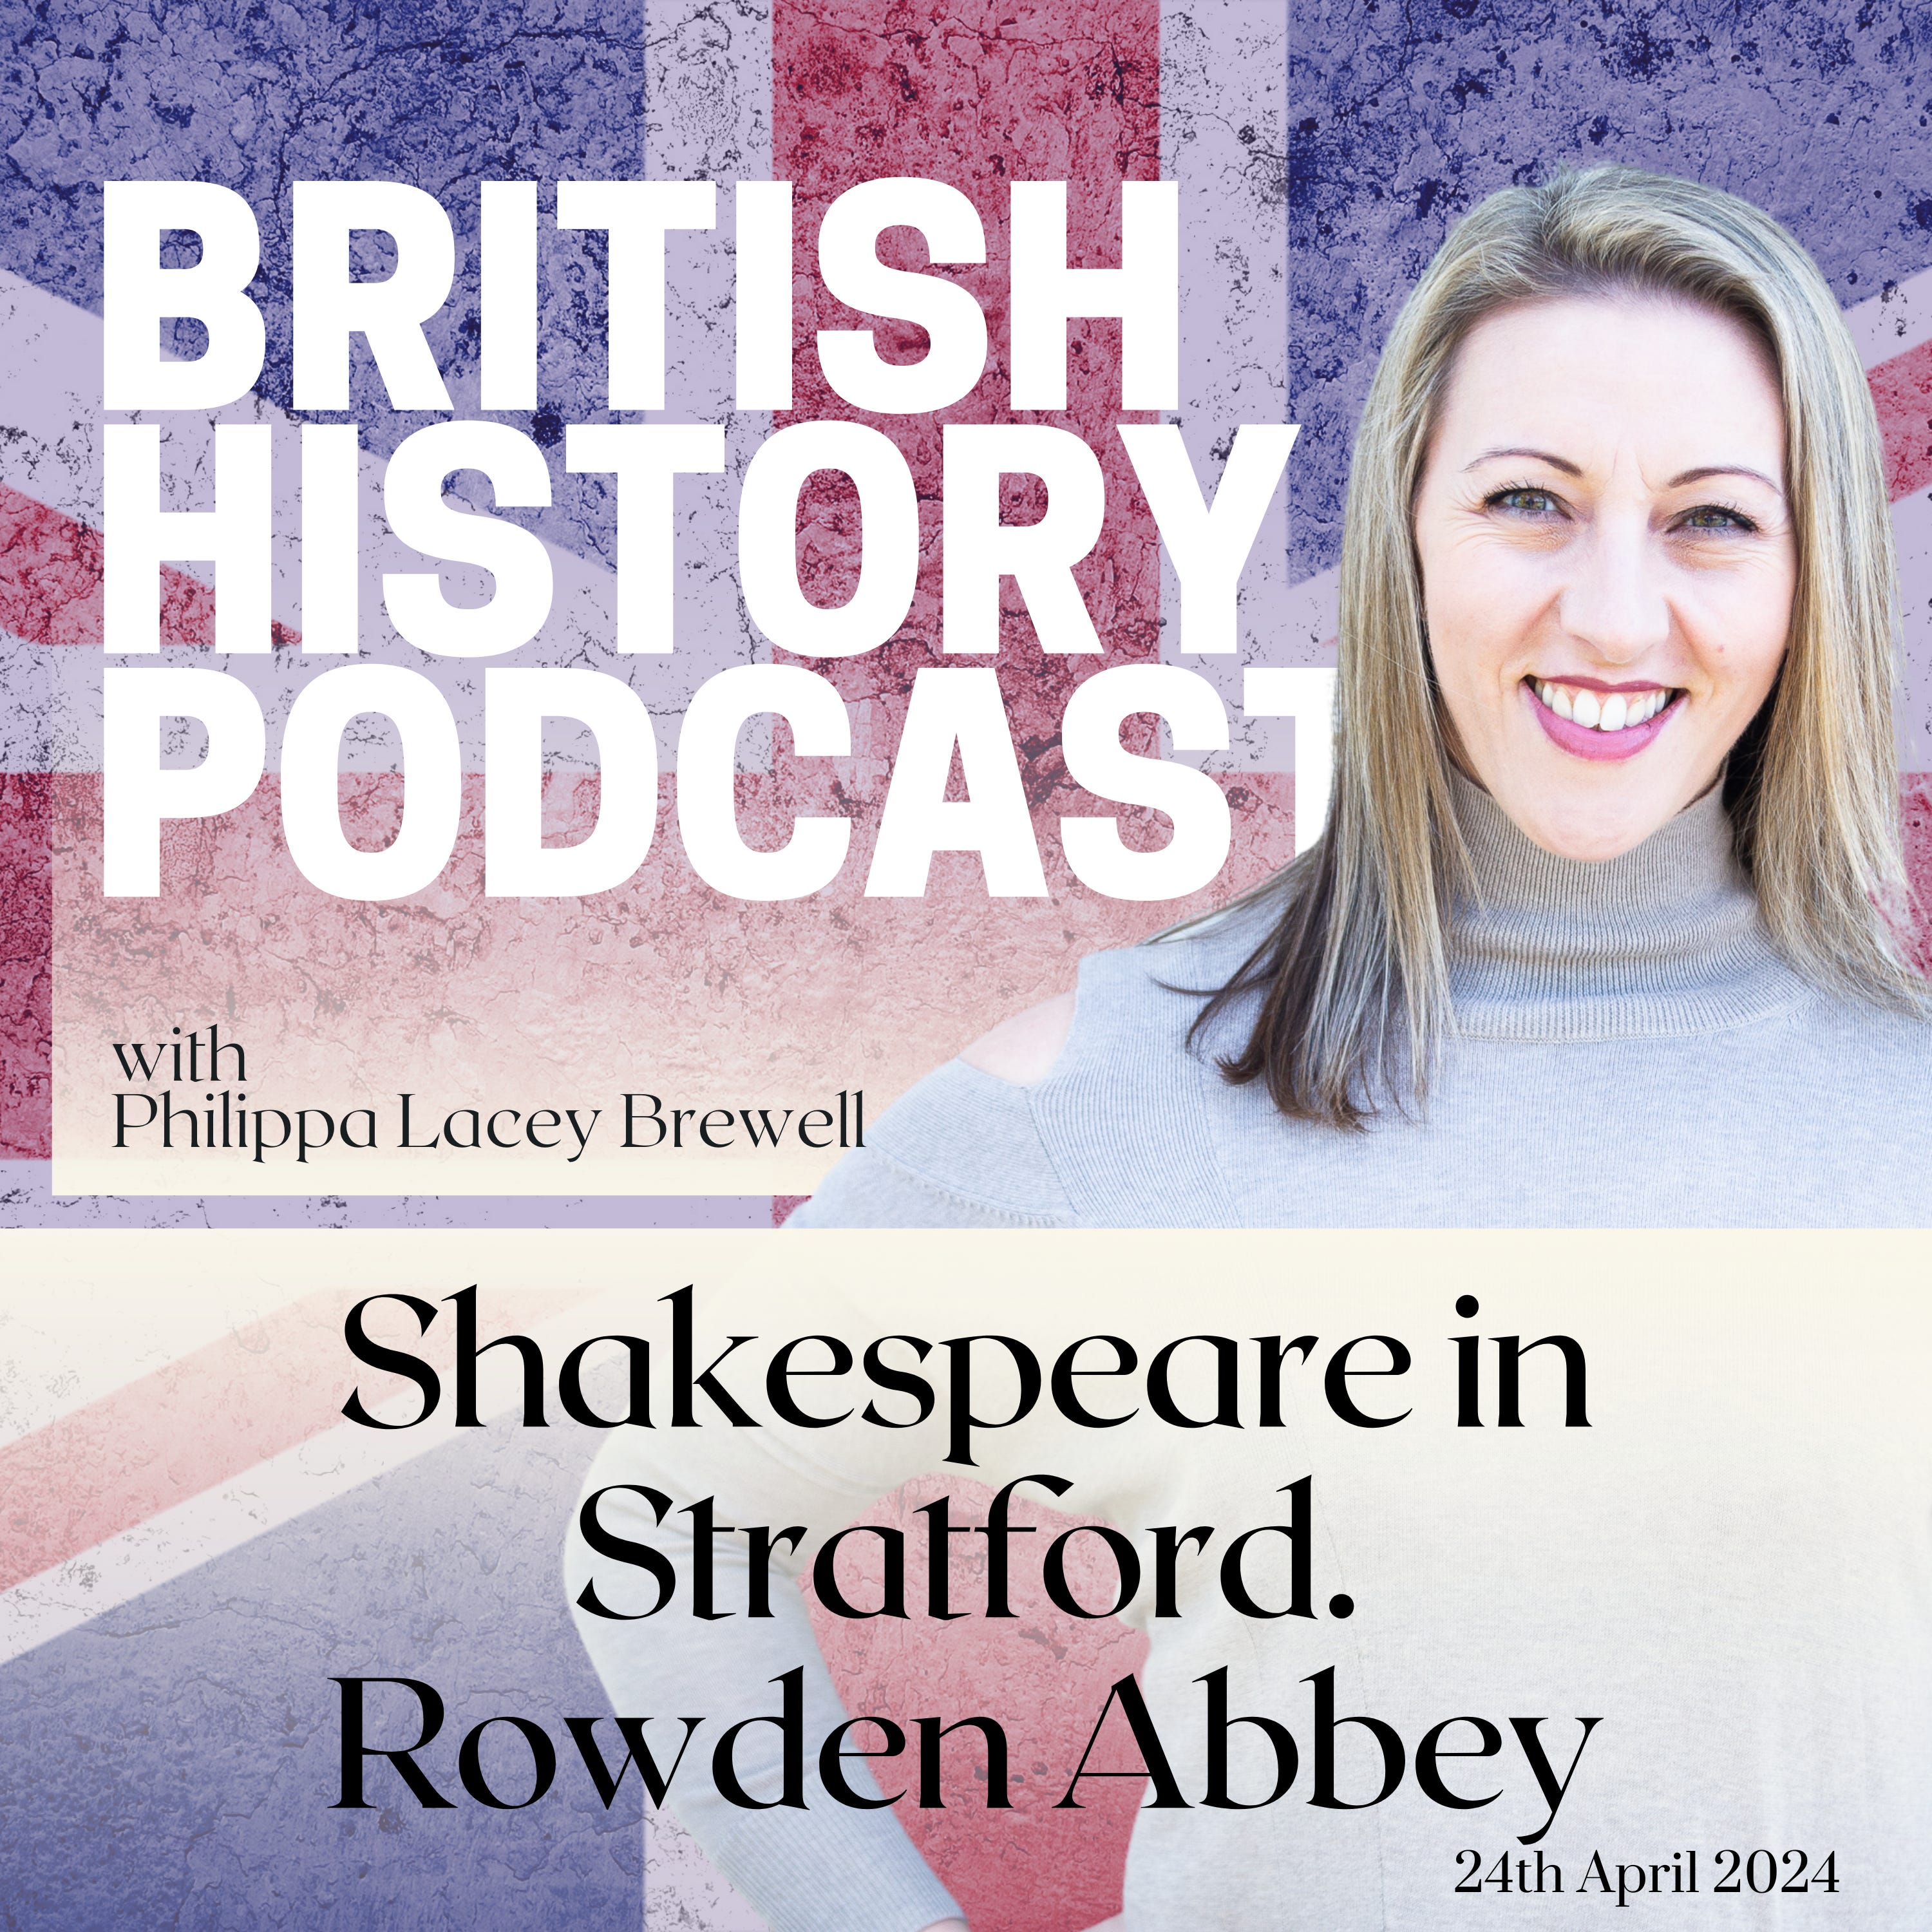 Shakespeare, and my visit to Rowden Abbey